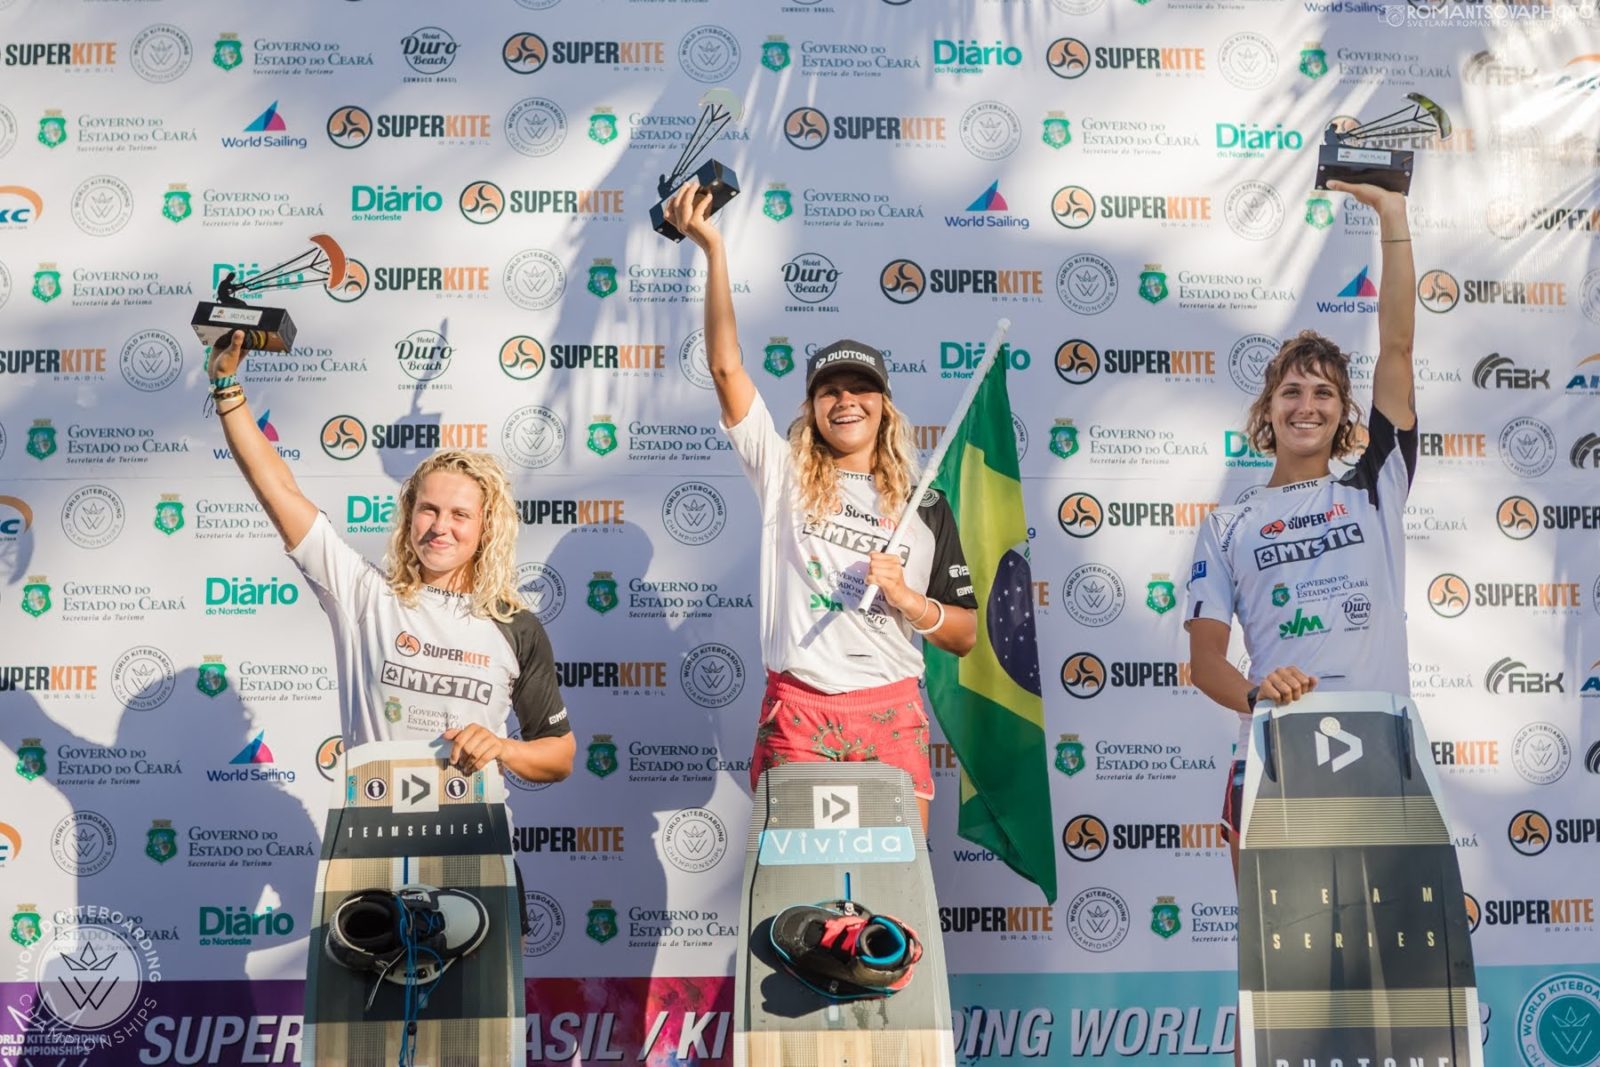 What Happened in the Female Kitesurfing Industry which Will Make 2019 an Exciting Year